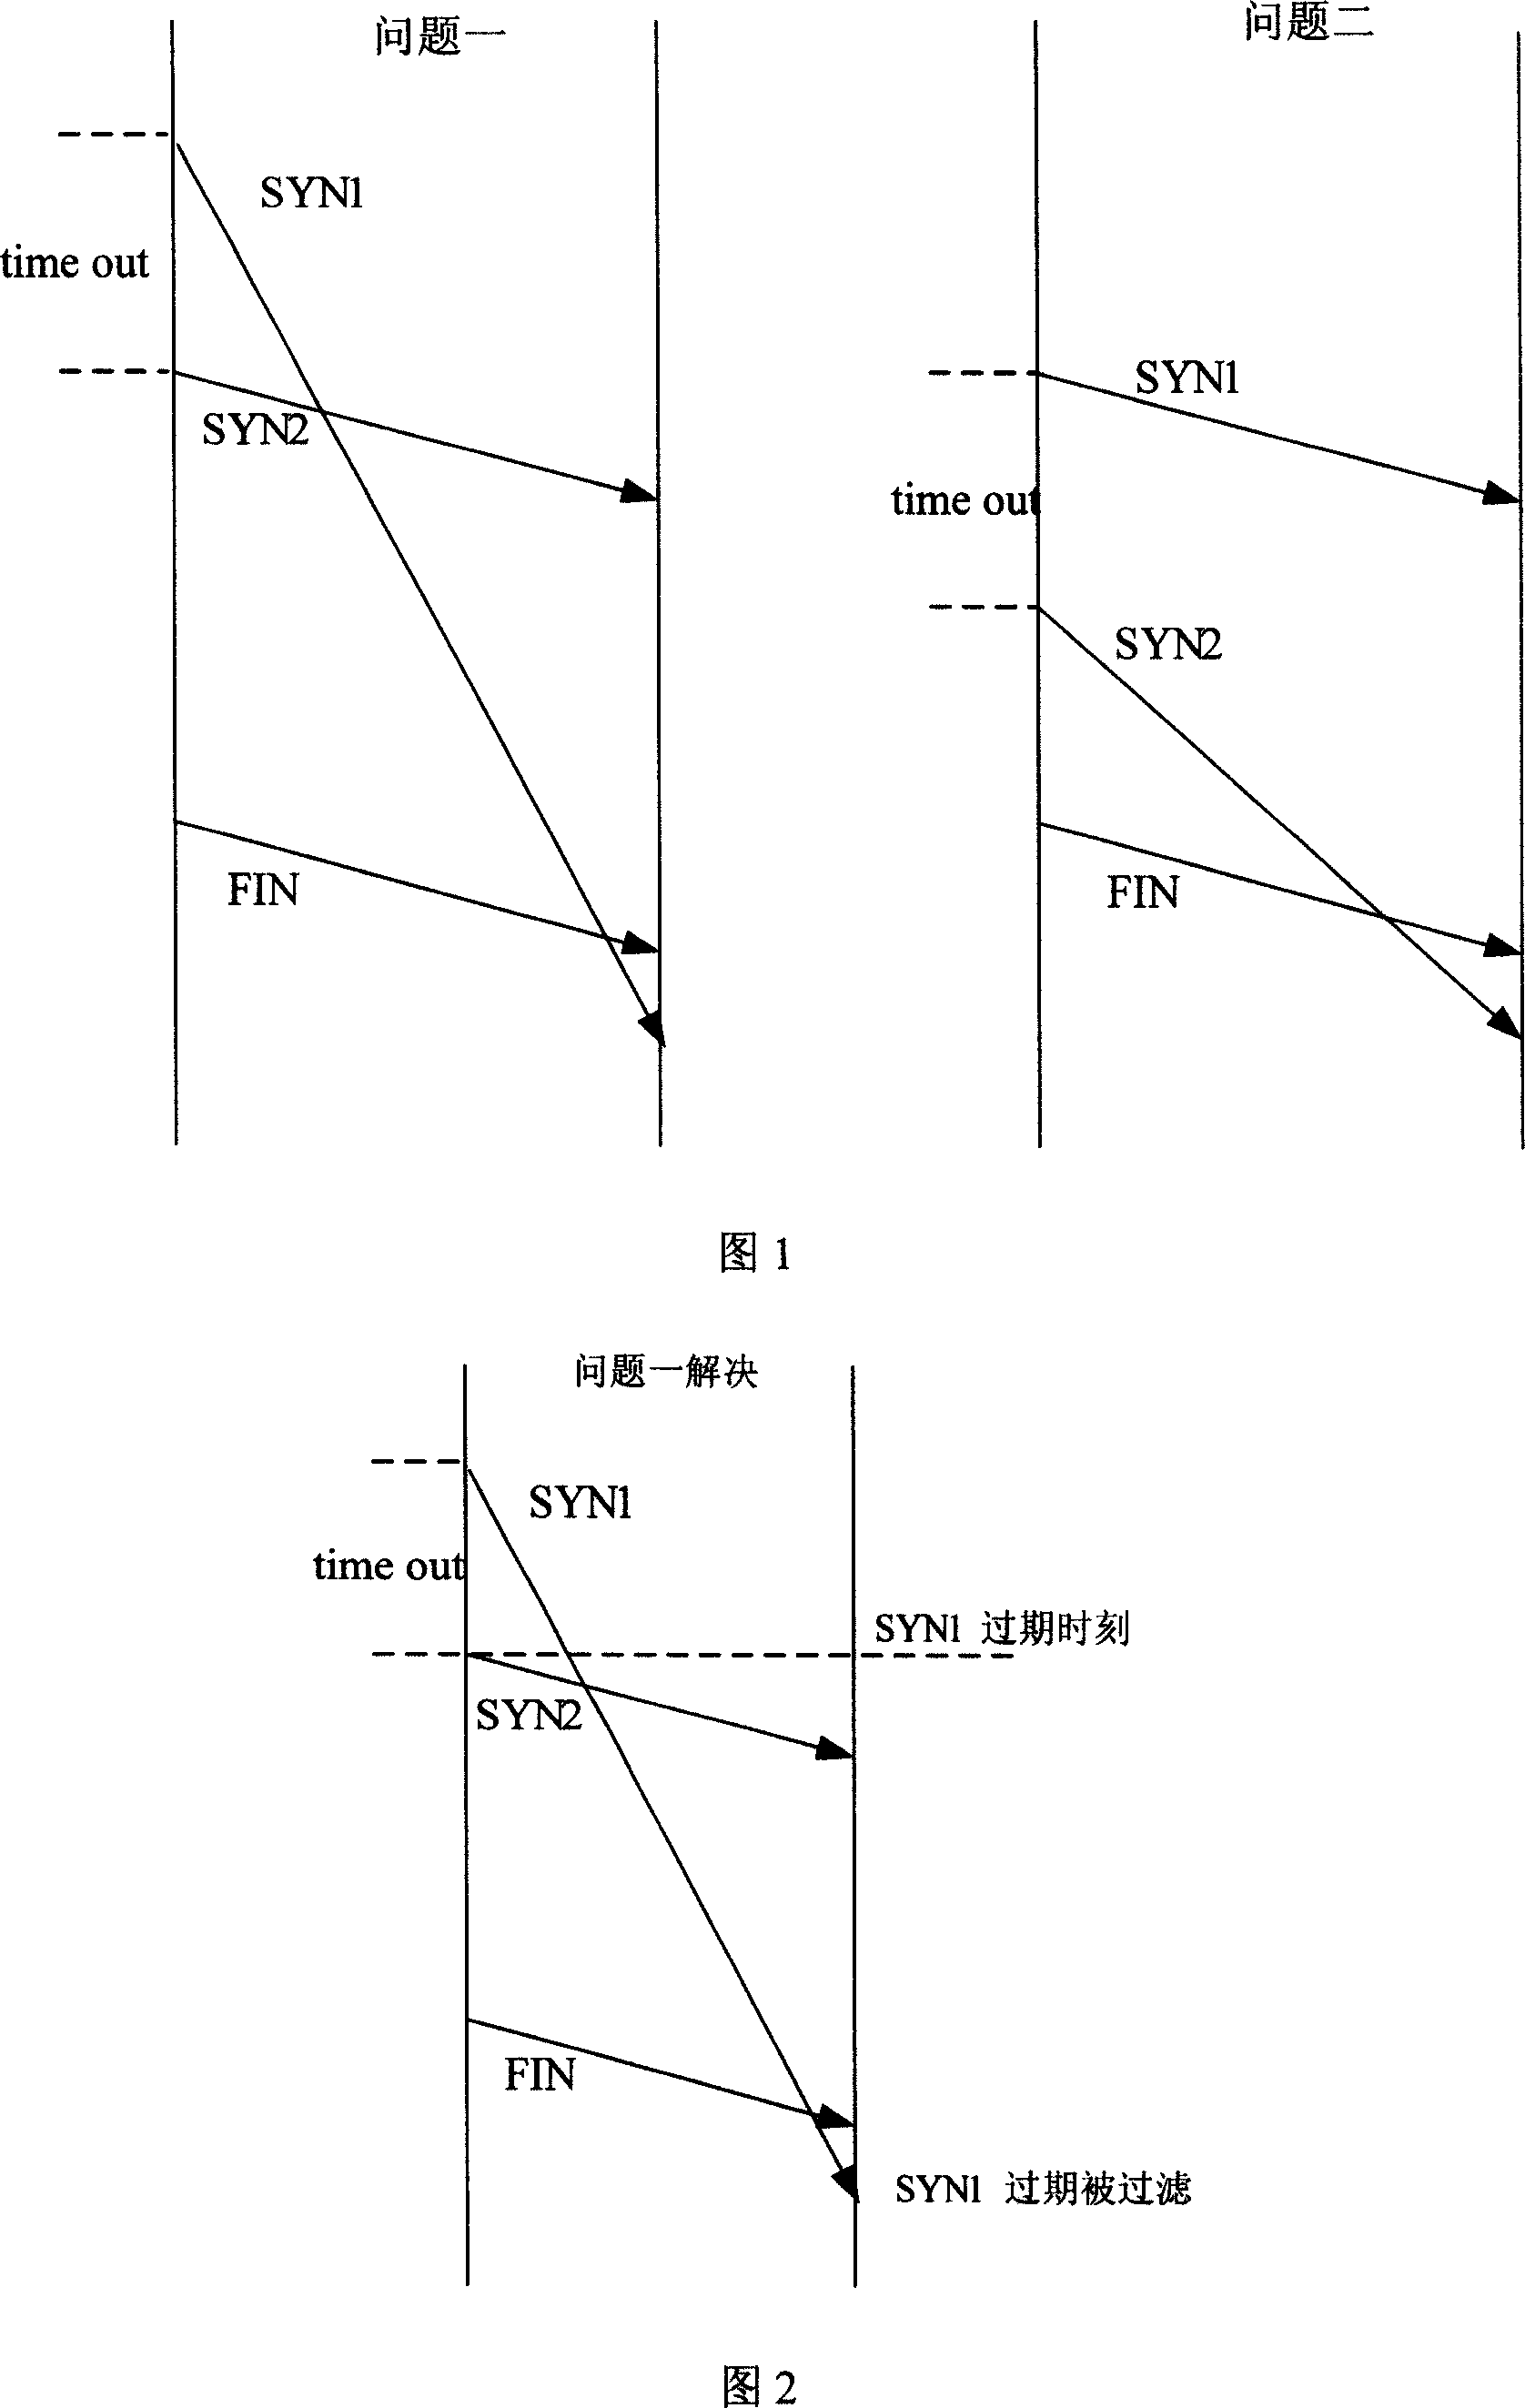 Reliable transfer method of short message in the ad hoc network